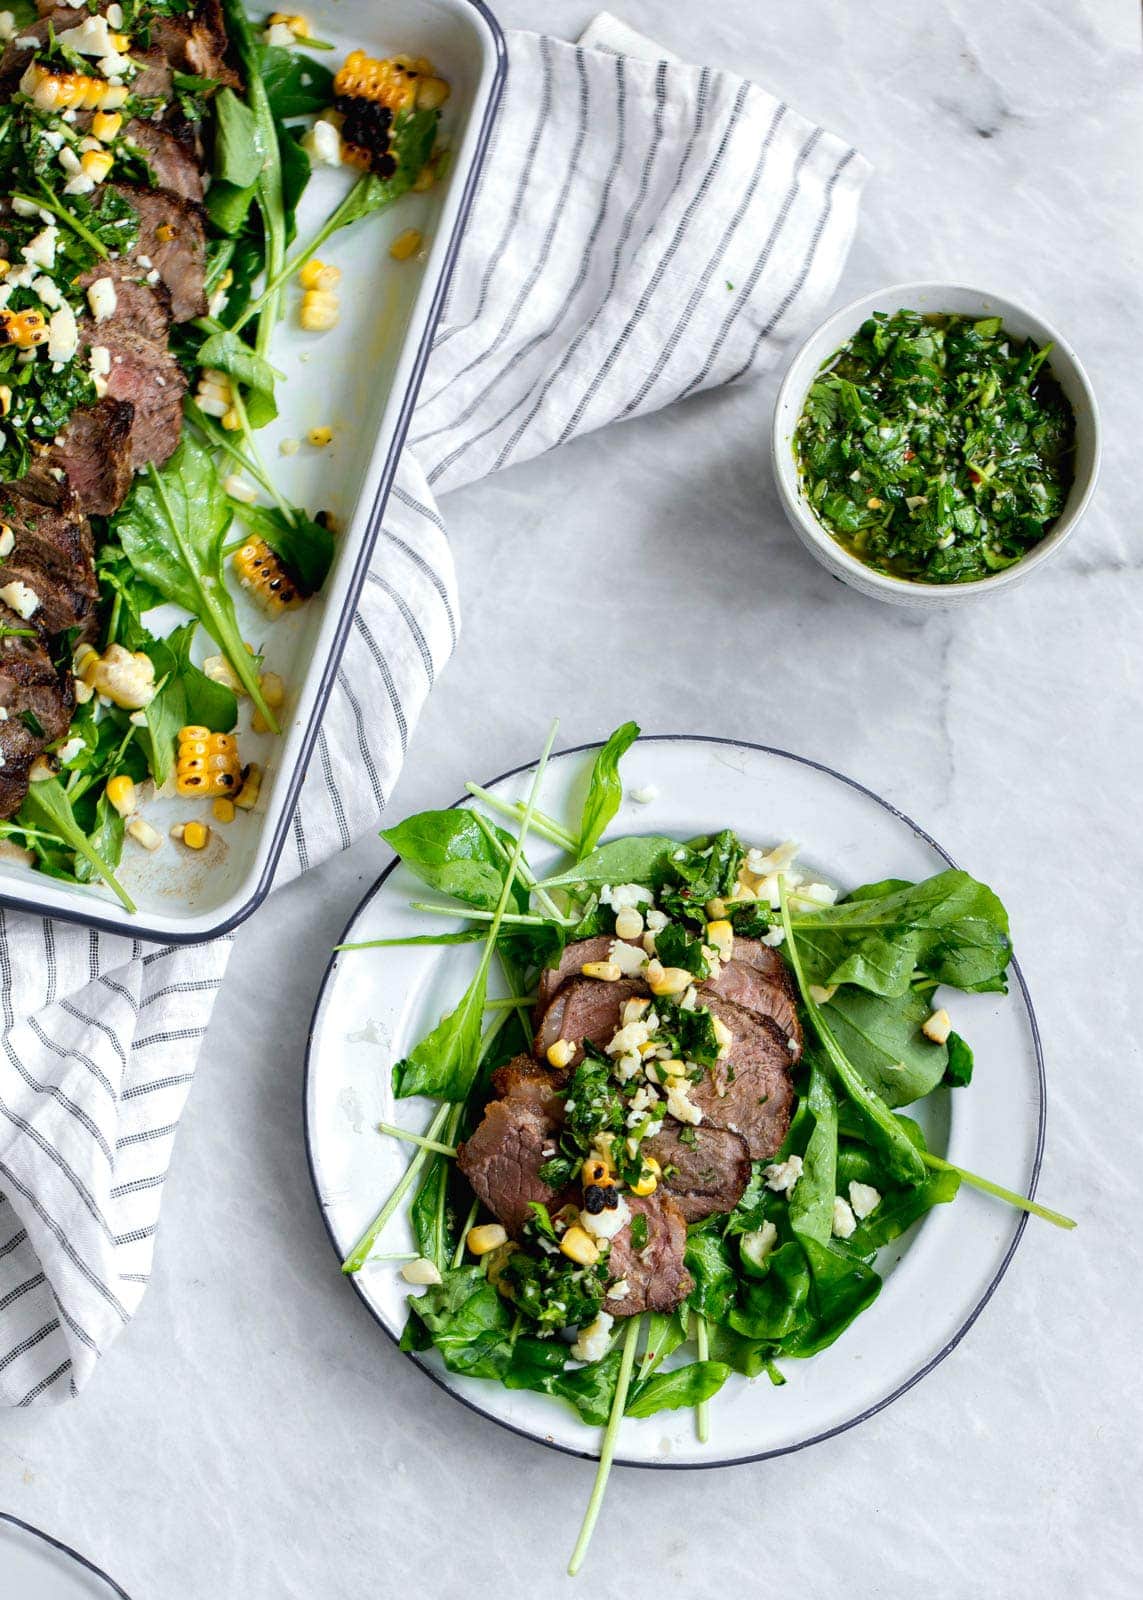 An epic Chimichurri Steak Salad with charred corn, cotija cheese, arugula, and a homemade chimichurri sauce. Perfect for summer nights!